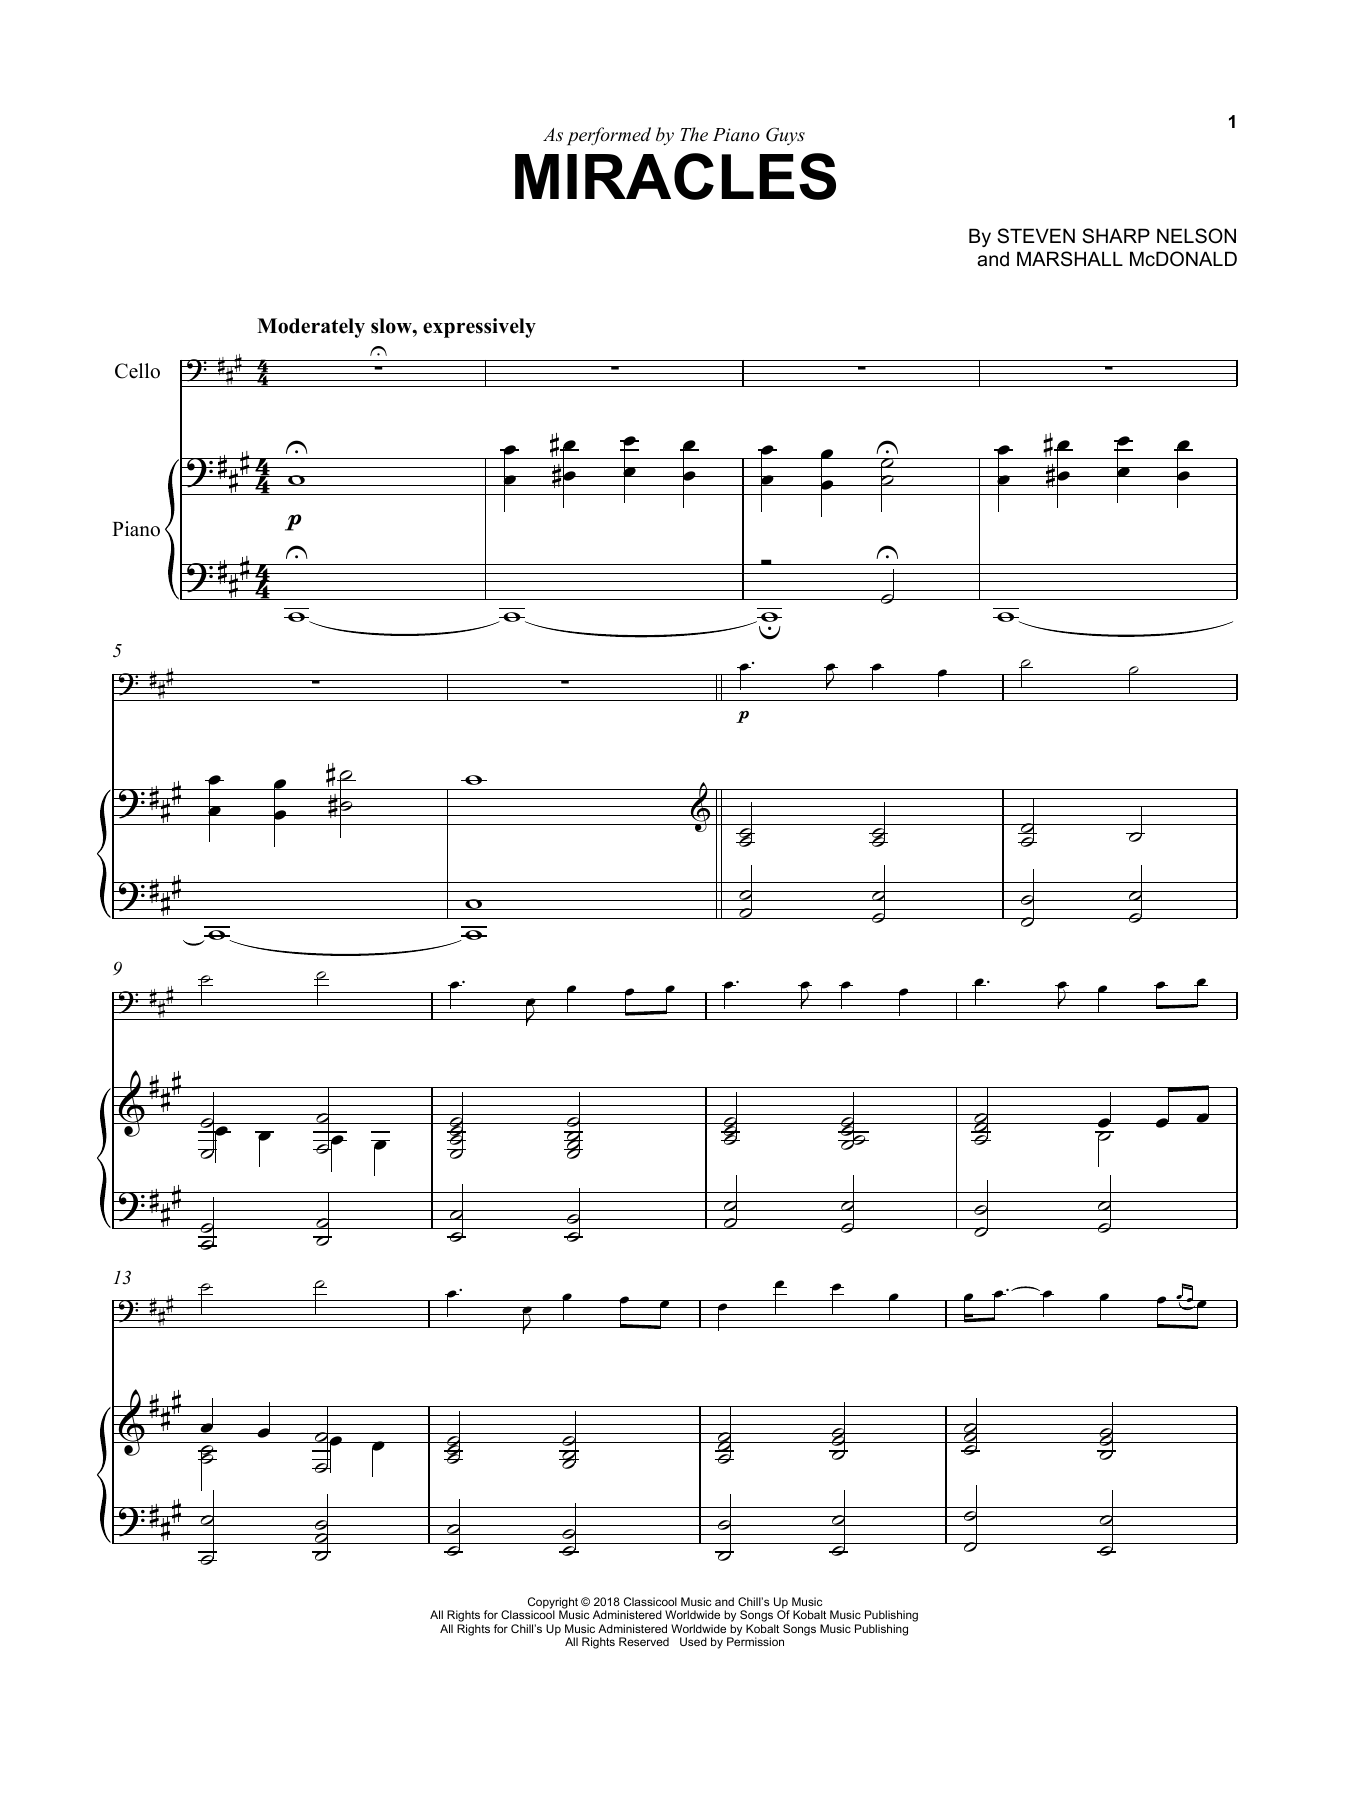 Download The Piano Guys Miracles Sheet Music